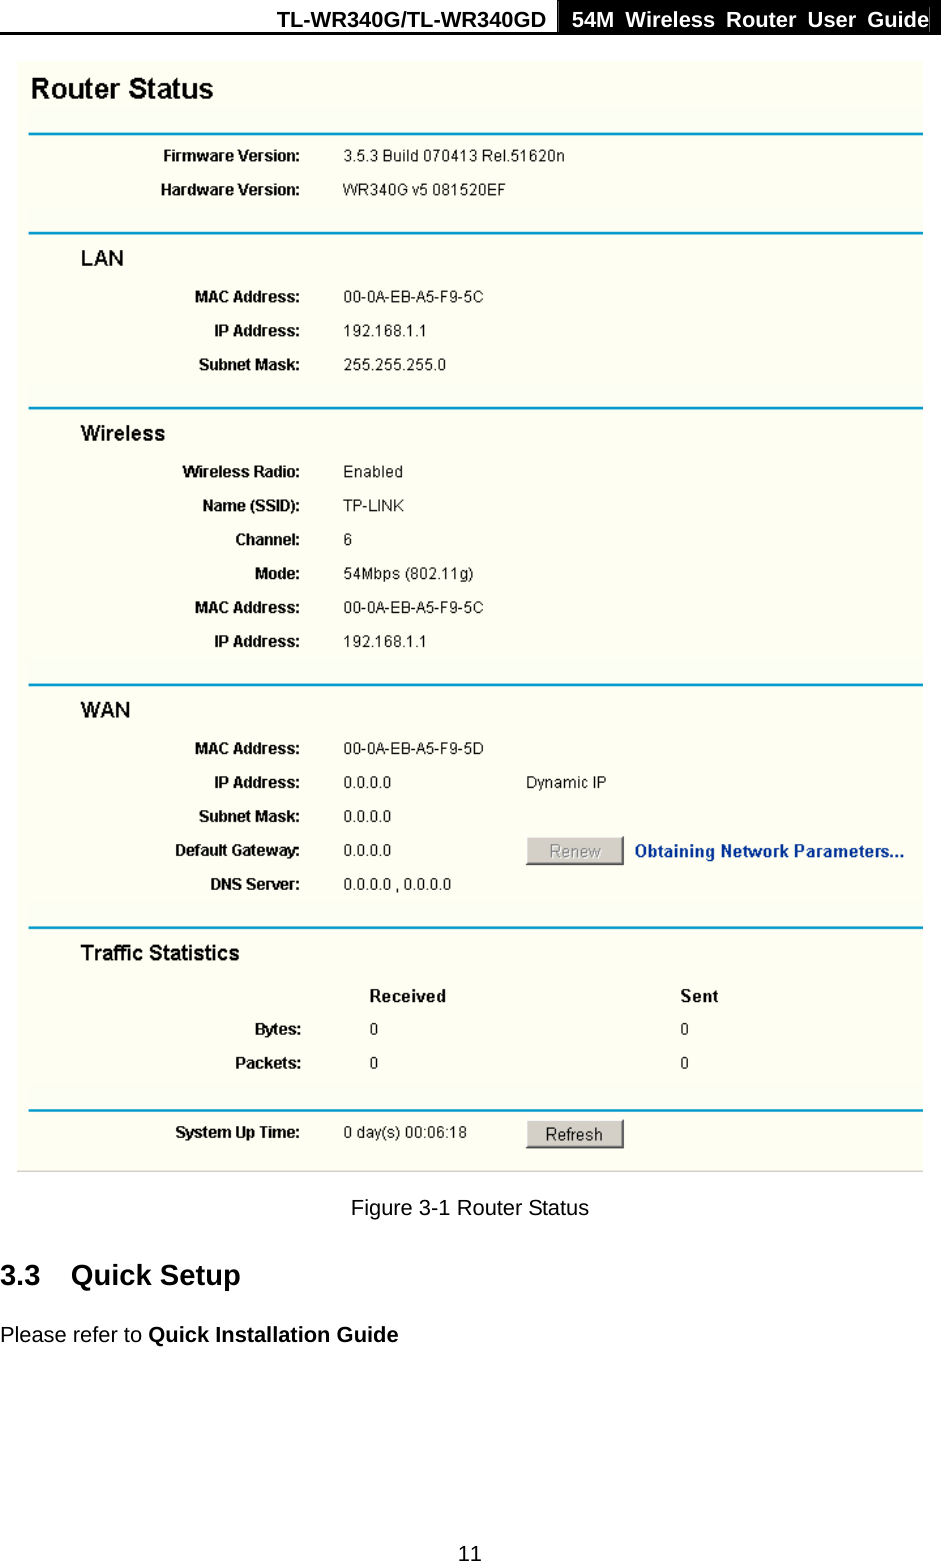 TL-WR340G/TL-WR340GD 54M Wireless Router User Guide  11 Figure 3-1 Router Status 3.3 Quick Setup Please refer to Quick Installation Guide 